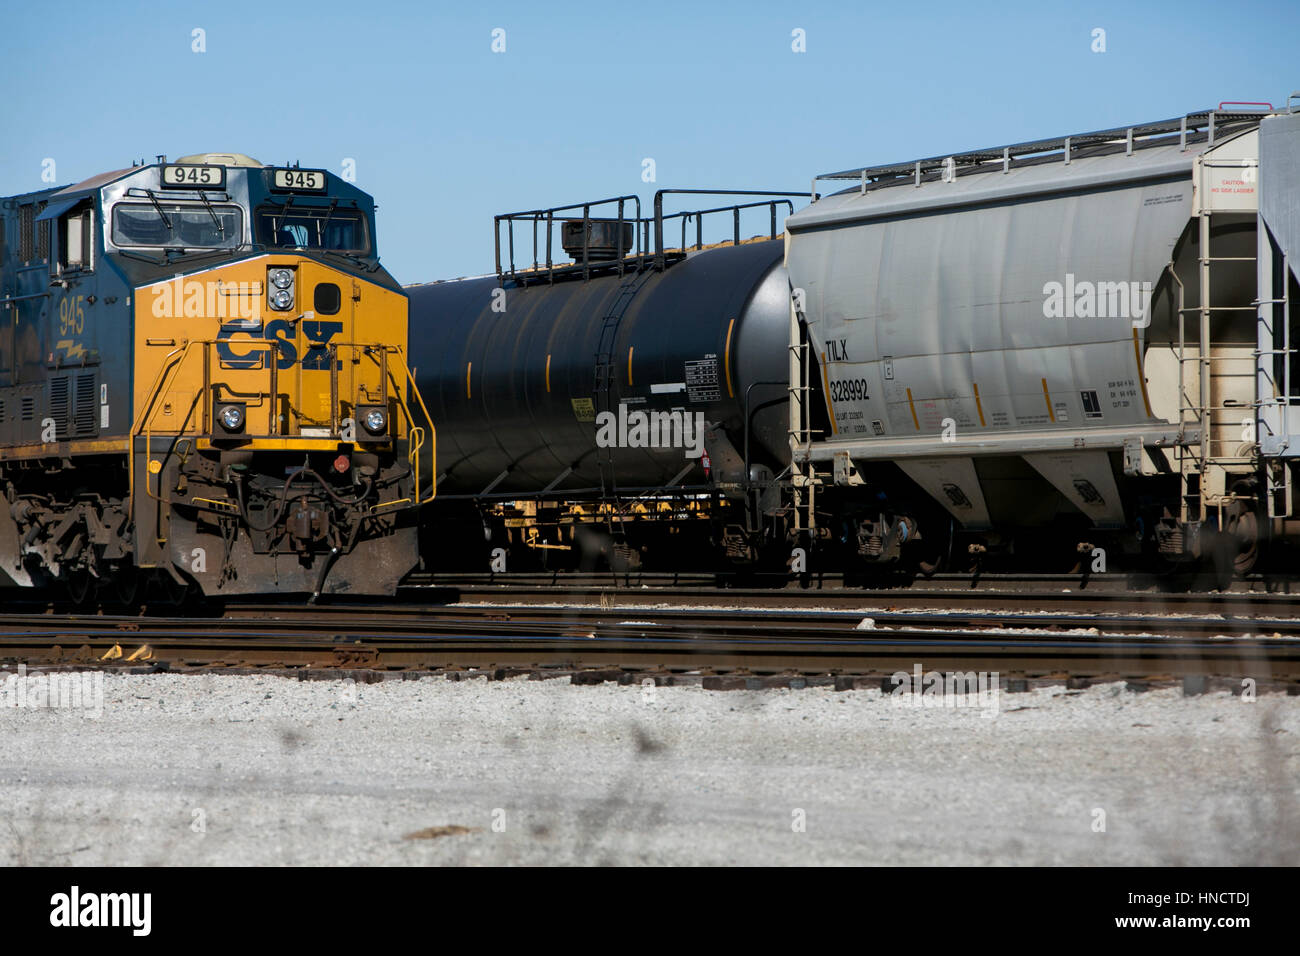 CSX Locomotives and train cars on a railroad siding in Nashville, Tennessee on February 4, 2017. Stock Photo